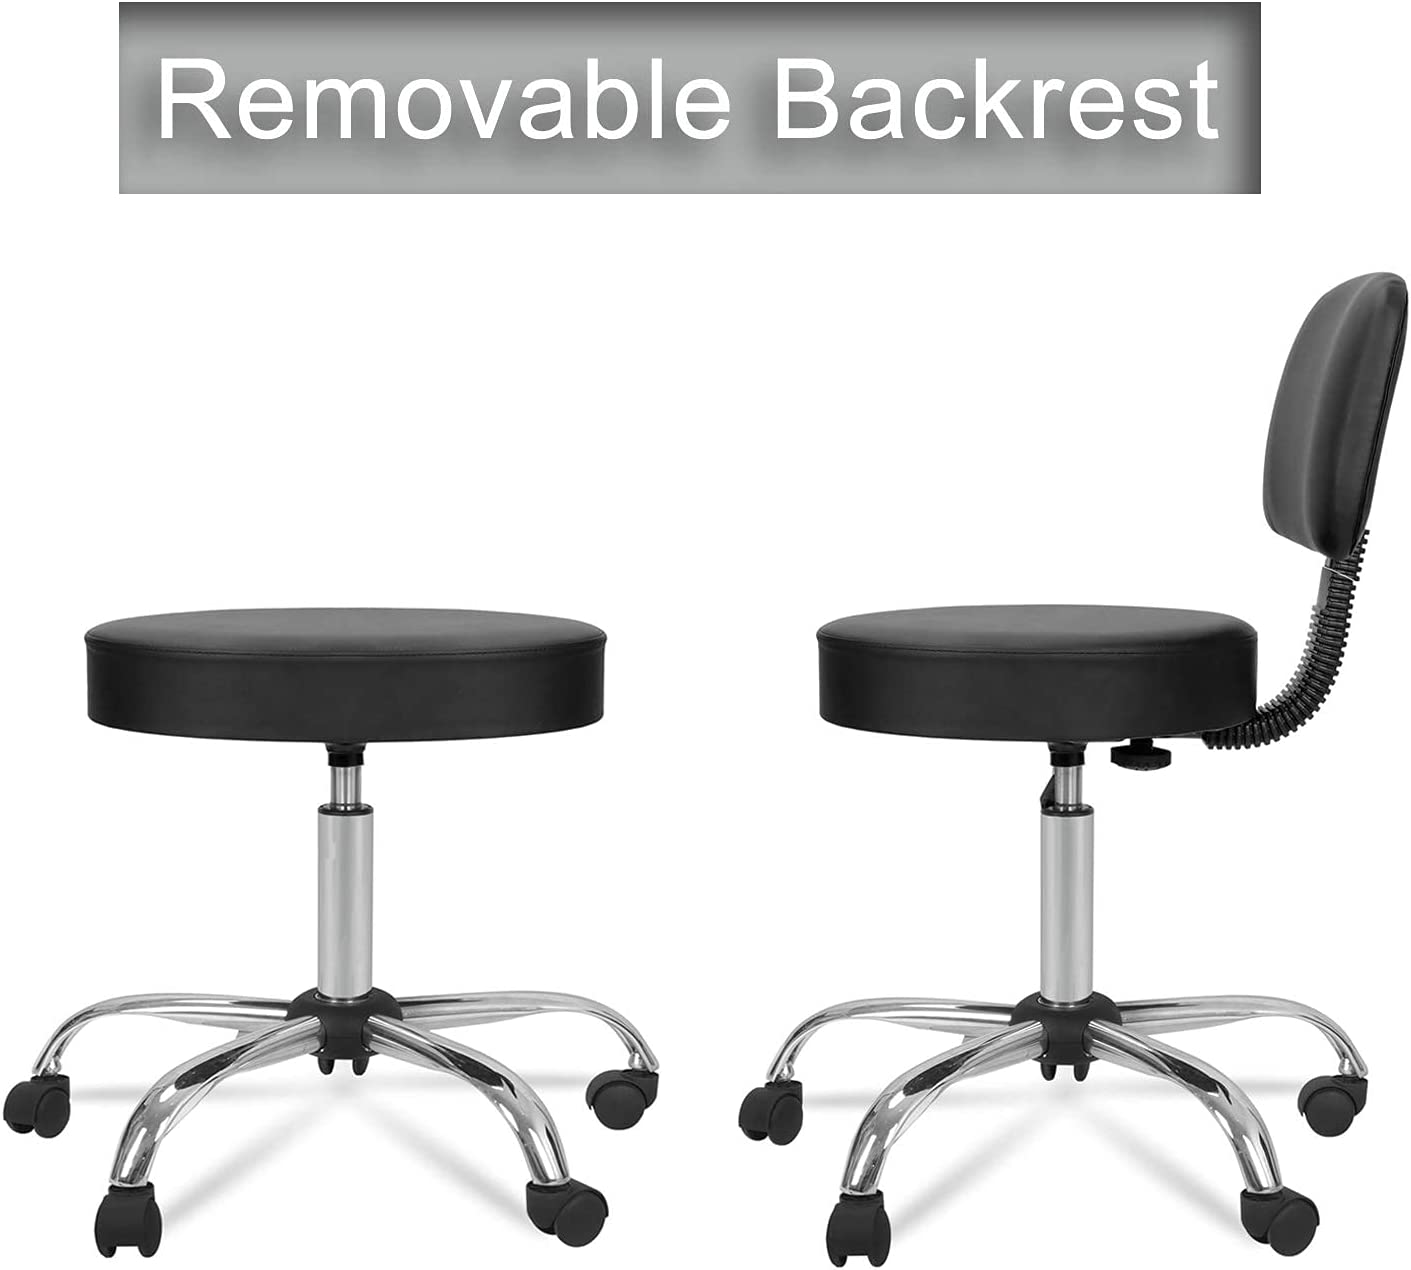 Swivel Salon Spa Stool Chair with Back Support Adjustable Hydraulic Rolling Stool Office Stool with Back for Beauty Barber Tattoo Massage Drafting Medical,Black